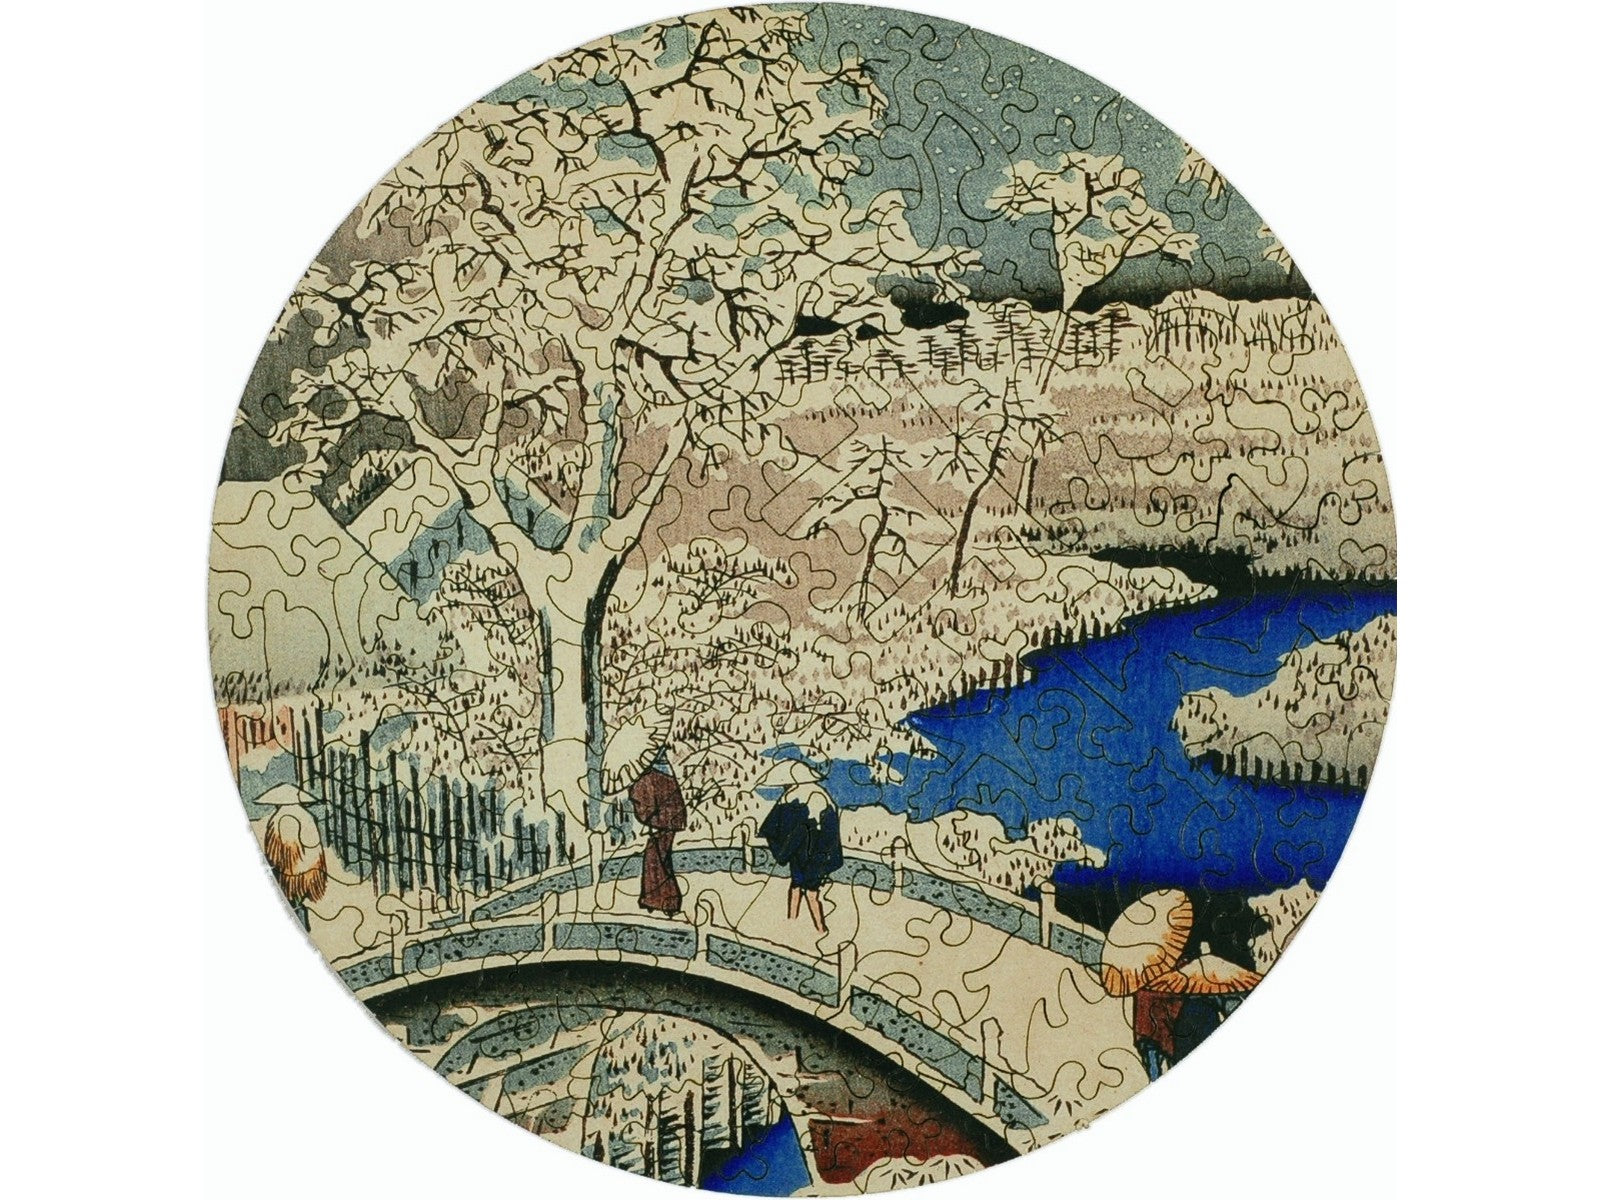 The front of the puzzle, Meguro Drum Bridge, which shows a Japanese style woodblock print of people crossing a bridge over a river.